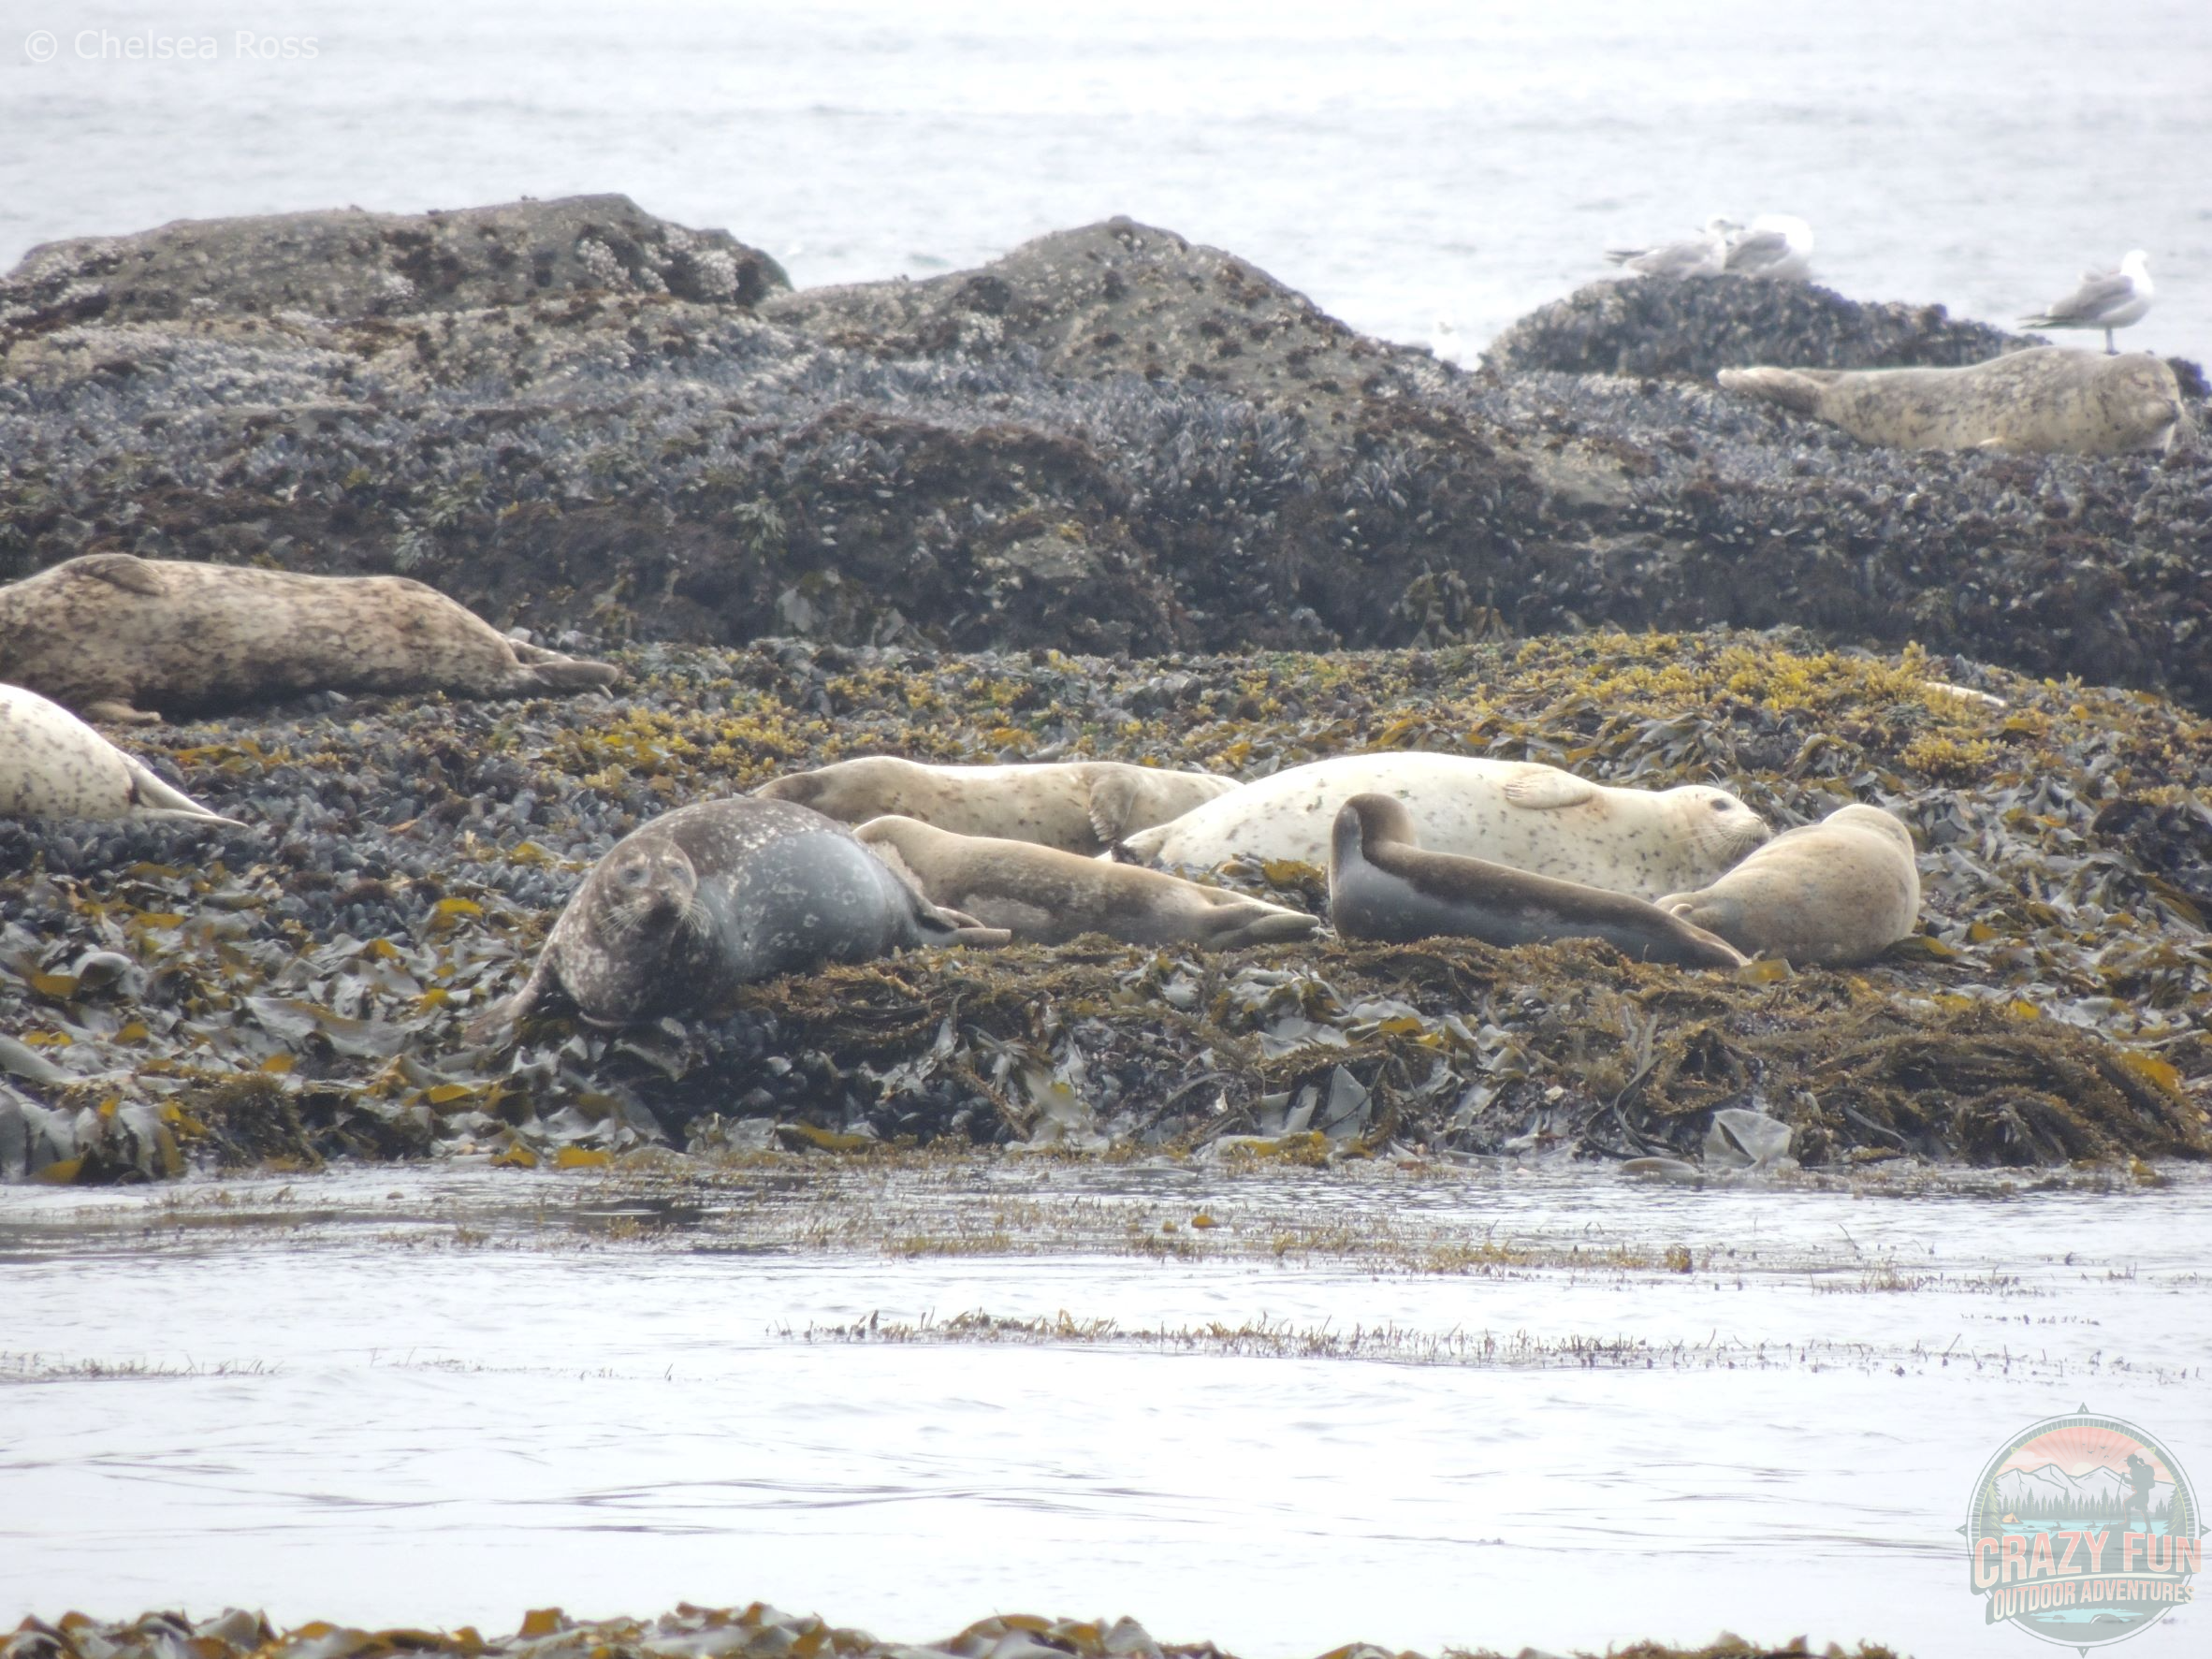 Sea lions lying on sea weed on rocks were seen when backpacking the West Coast Trail